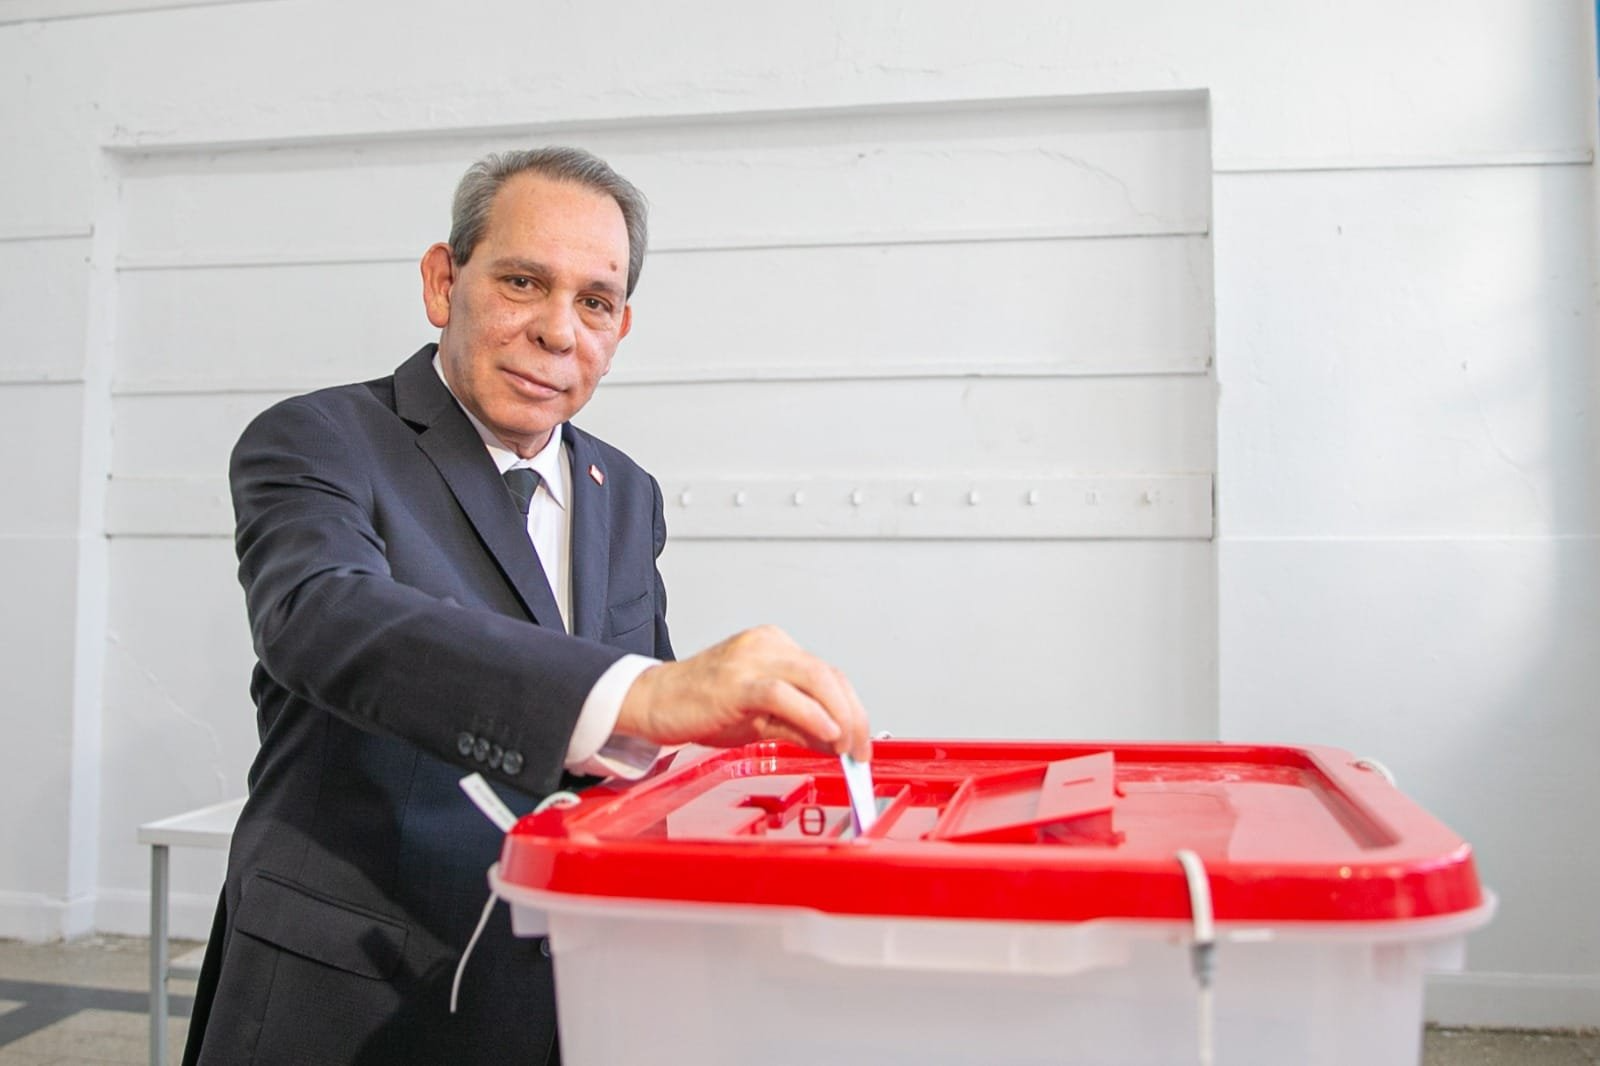 Tunisie-Elections locales: Ahmed Hachani vote